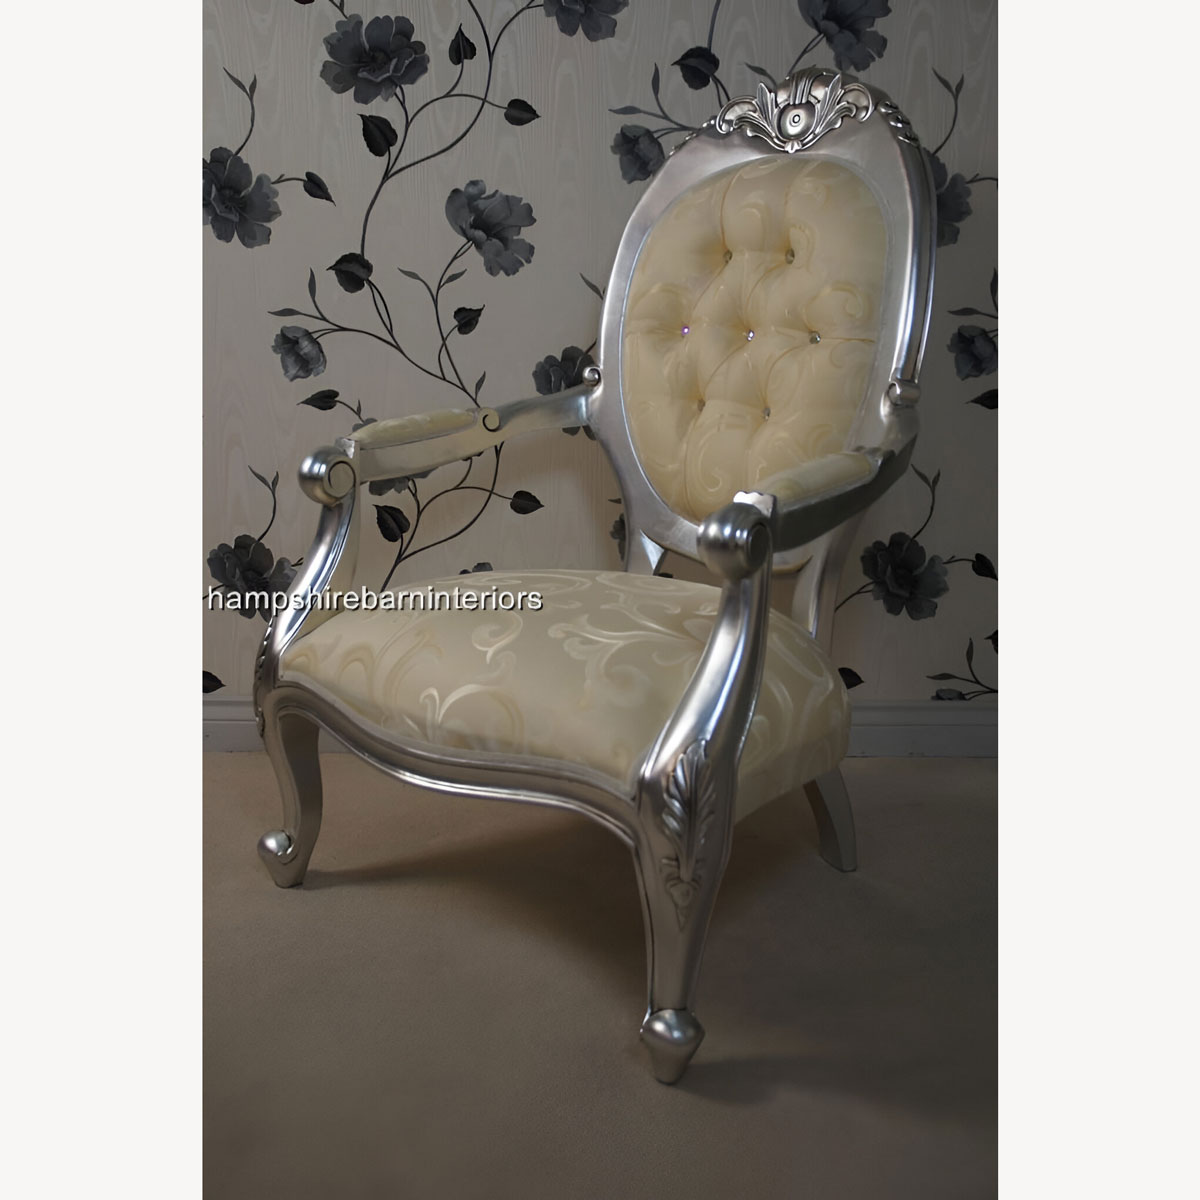 A Chatsworth Arm Throne Chair In Silver Leaf Crystal Buttons And Cream Fabric 3 - Hampshire Barn Interiors - A Chatsworth Arm Throne Chair In Silver Leaf Crystal Buttons And Cream Fabric -